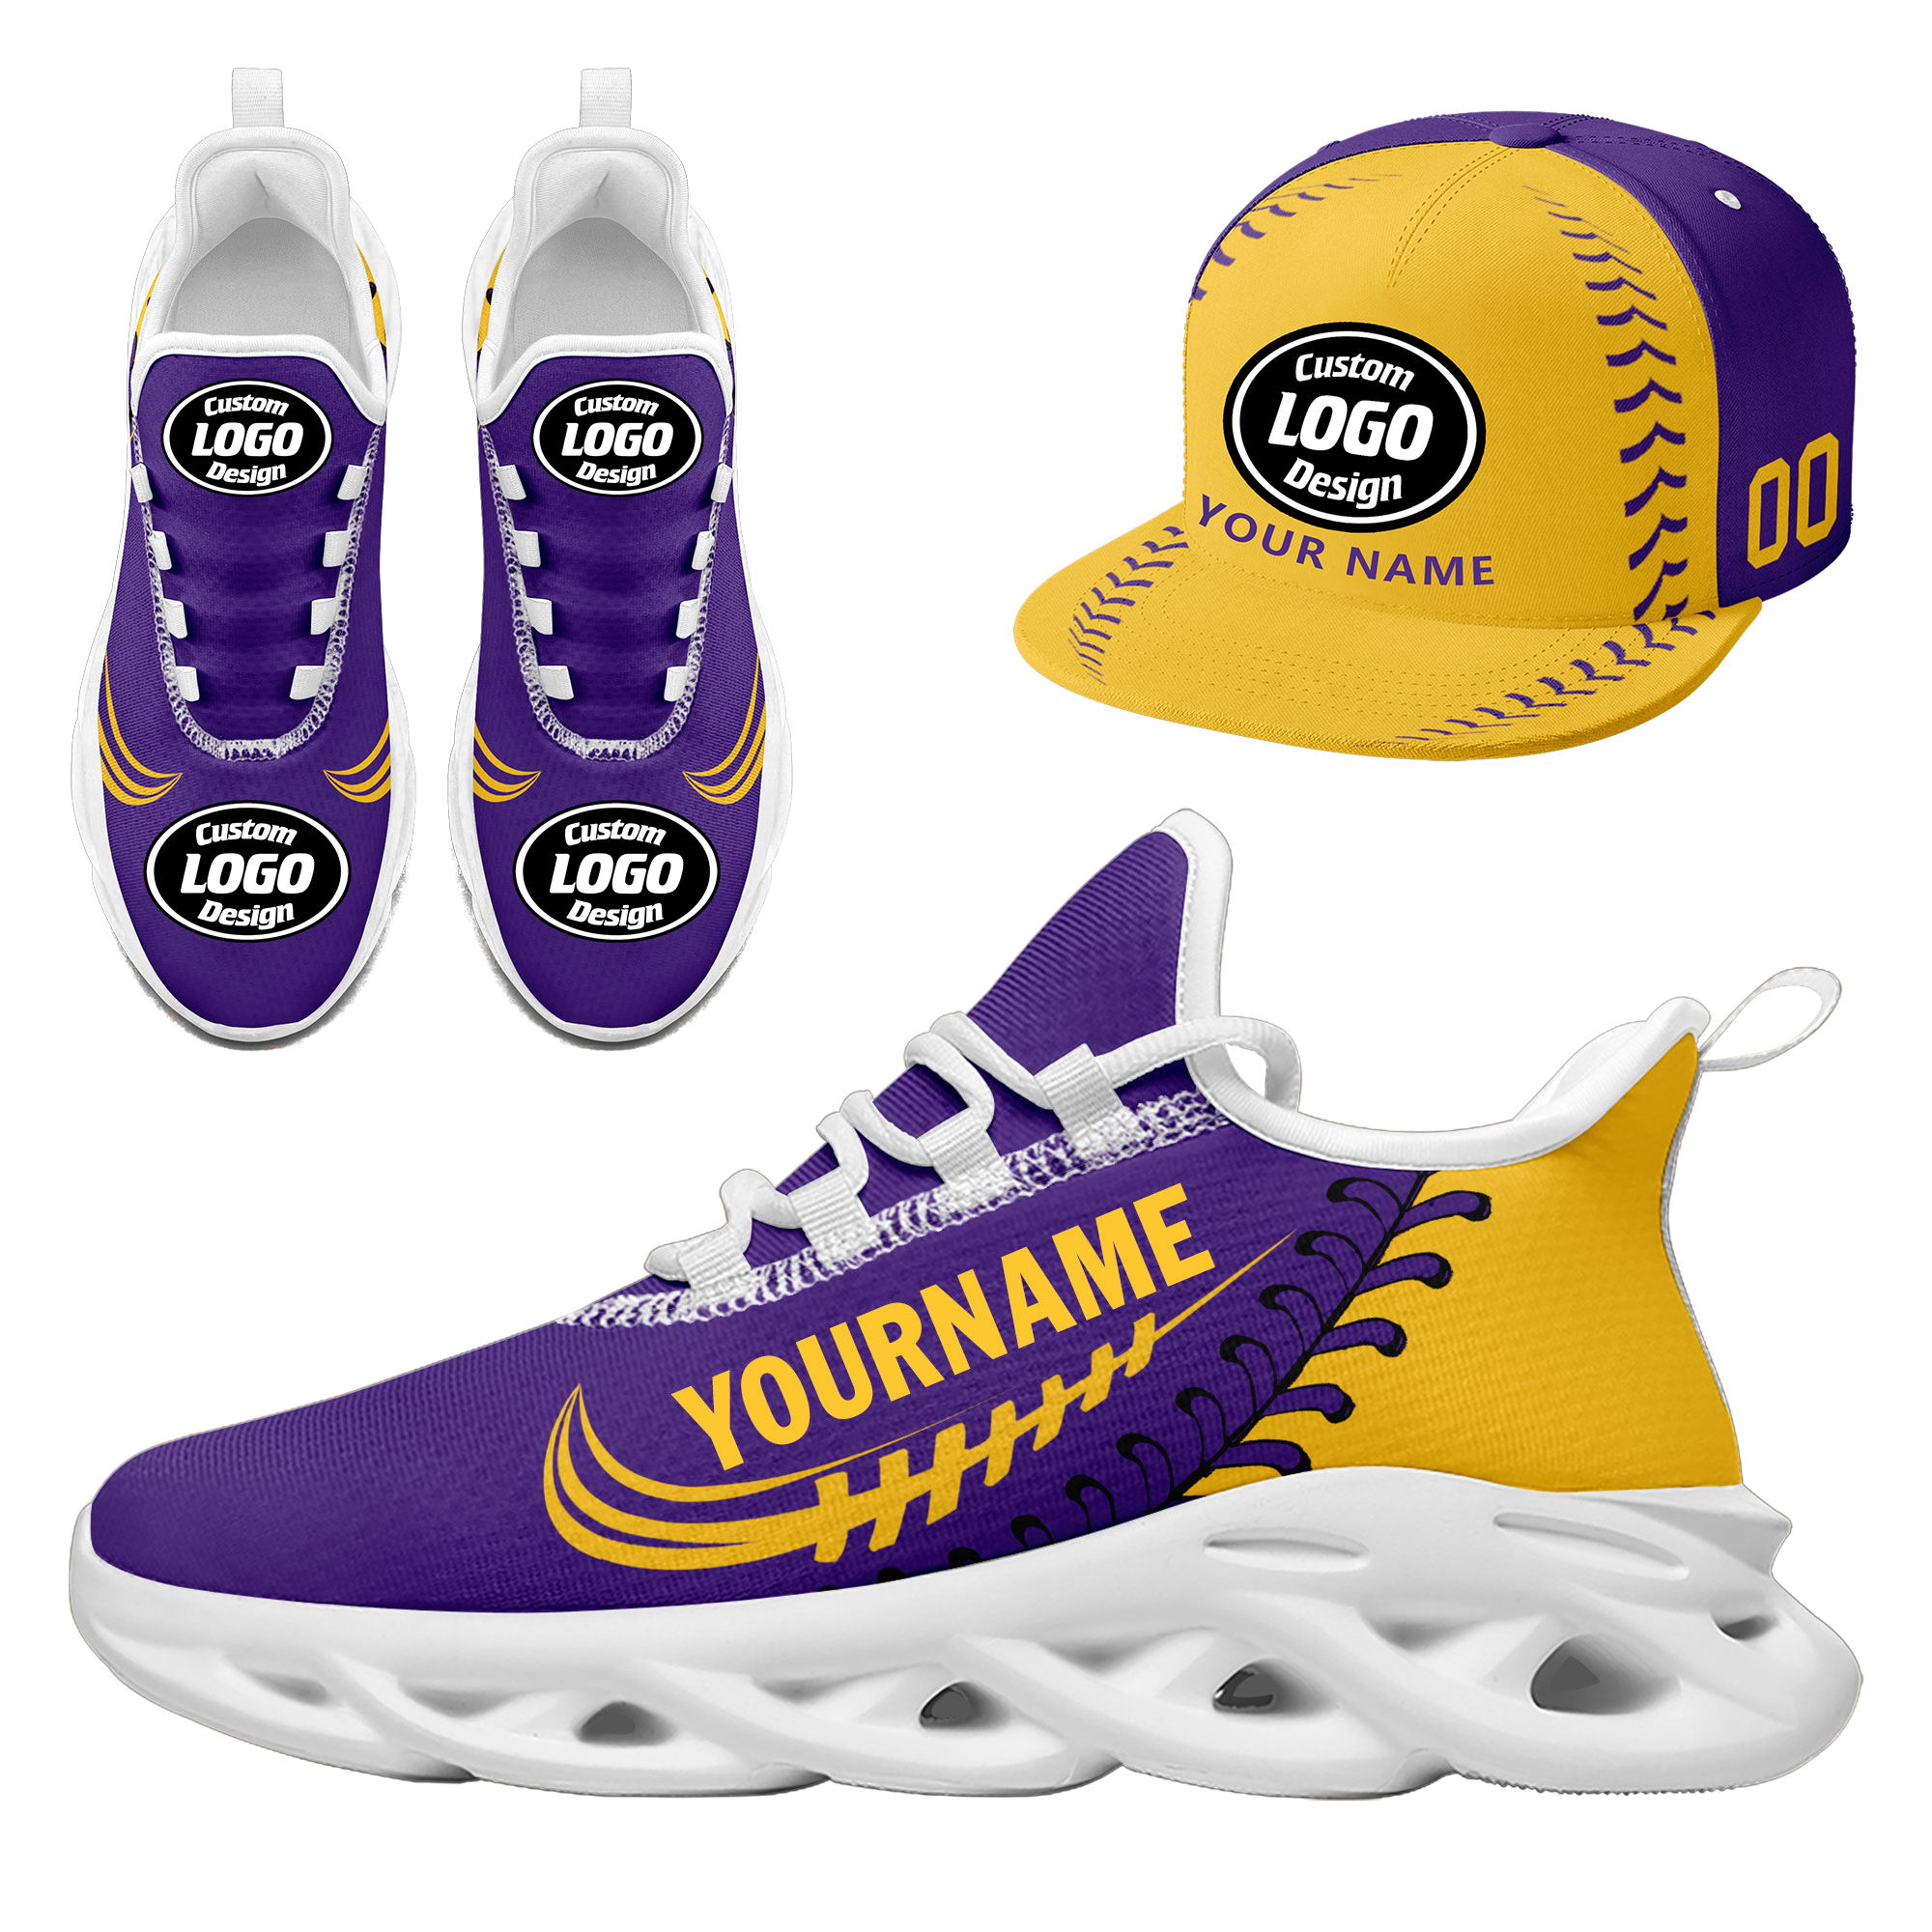 customized-sneakers-hats-personalized-design-printed-logo-picture-photo-on-sport-shoes-for-men-and-women-from-china-manufacturer-cj-pod-yellow-purple-white-sole-JH-24020051-22w